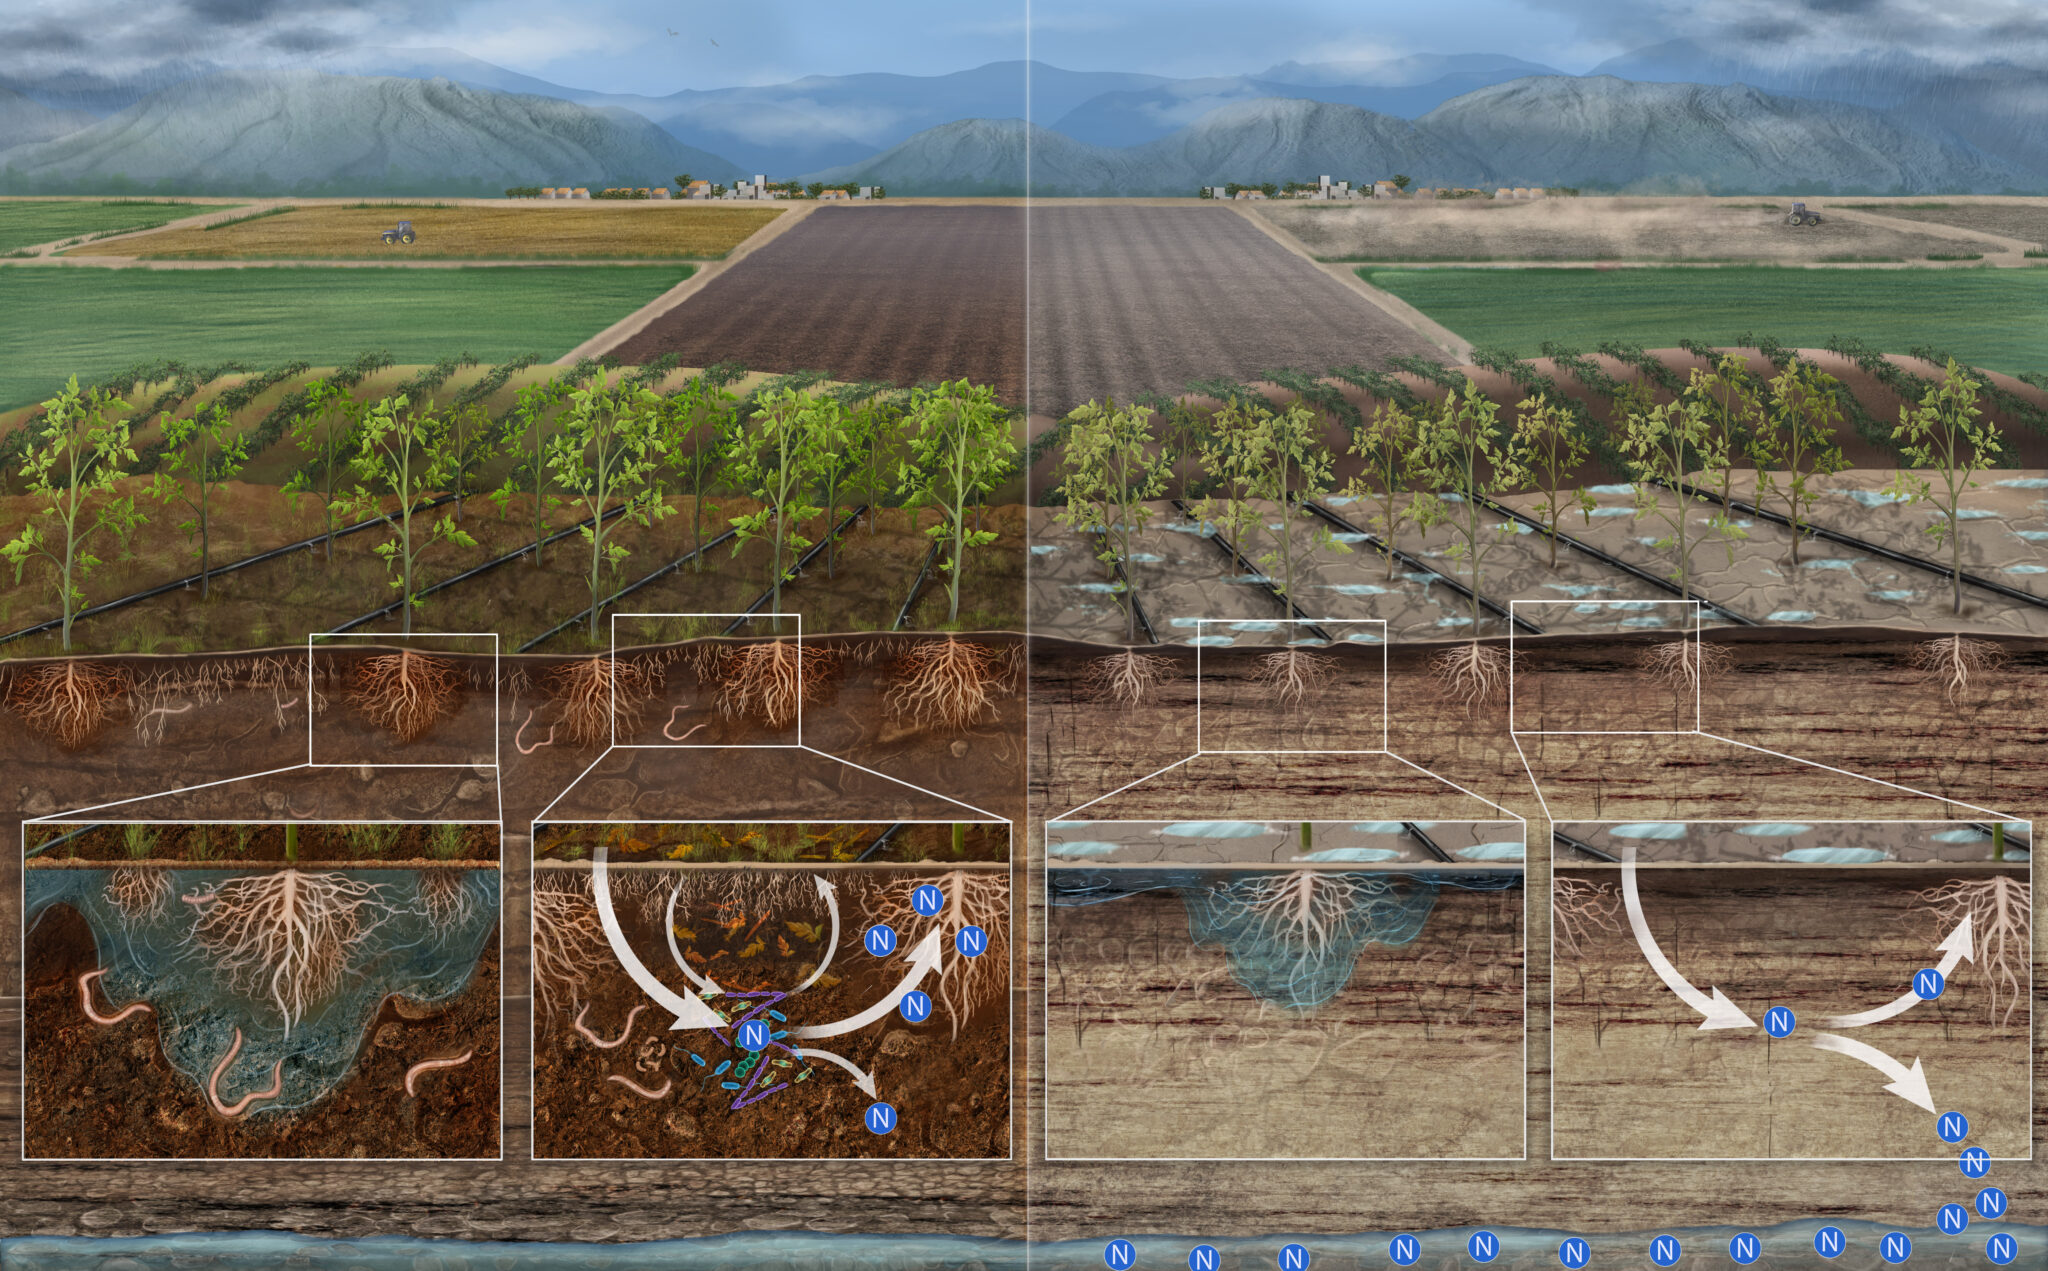 Scientific visualization for Sustainable Conservation showing the benefits of sustainable farming practices on crop health, SayoStudio.